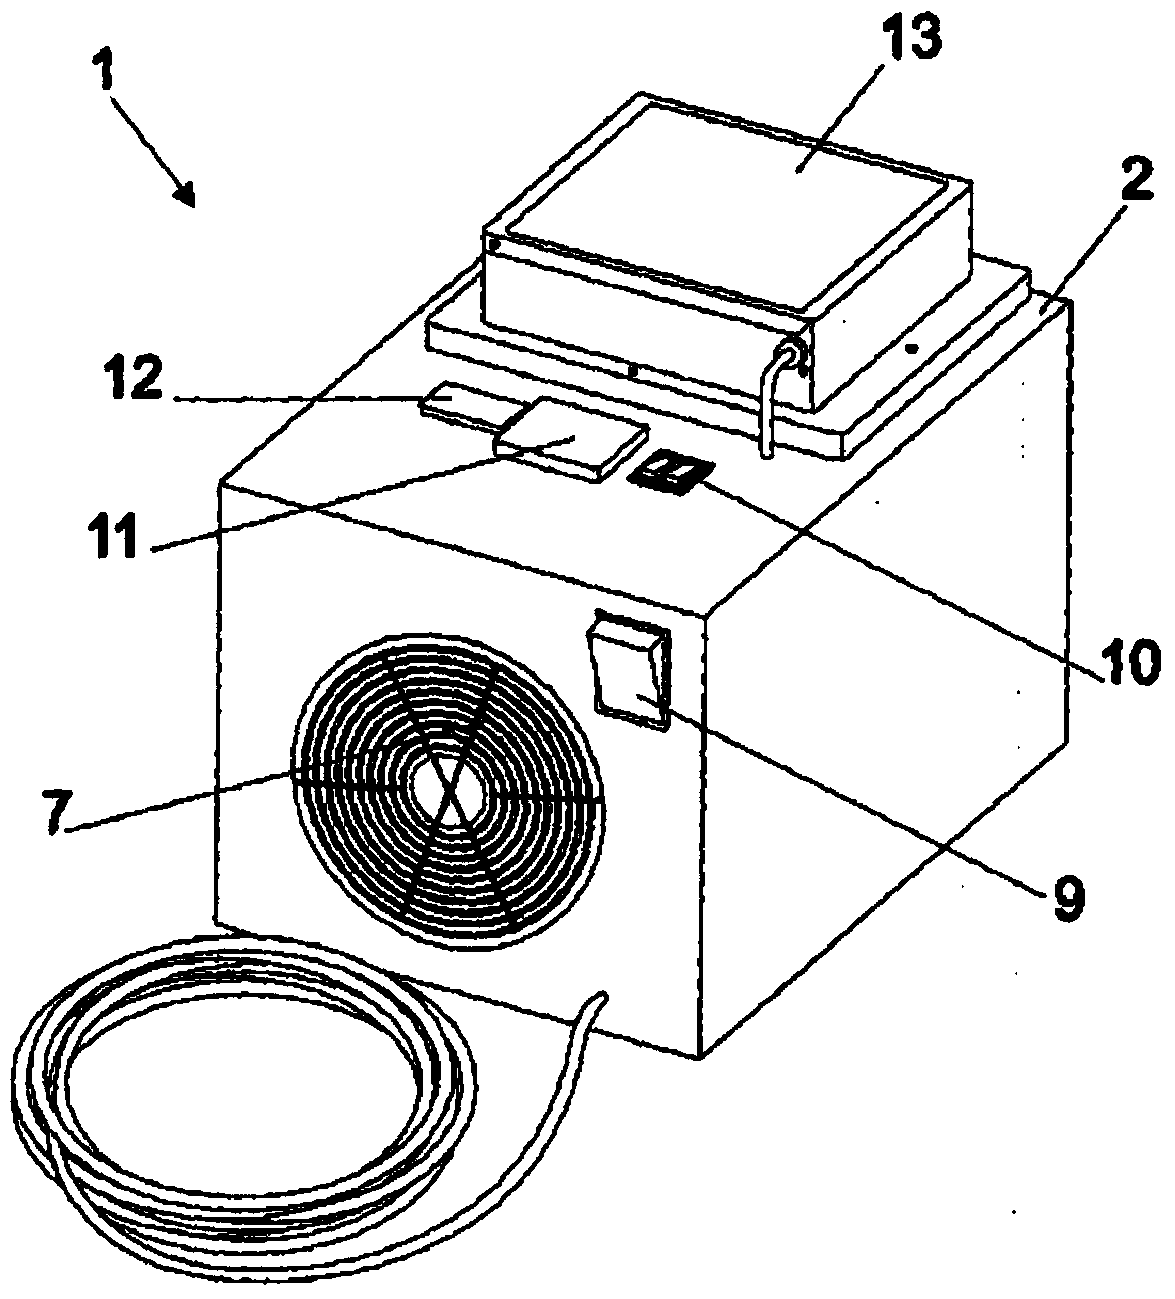 Device for sanitizing the air-conditioning system of vehicles using radiant catalytic ionization